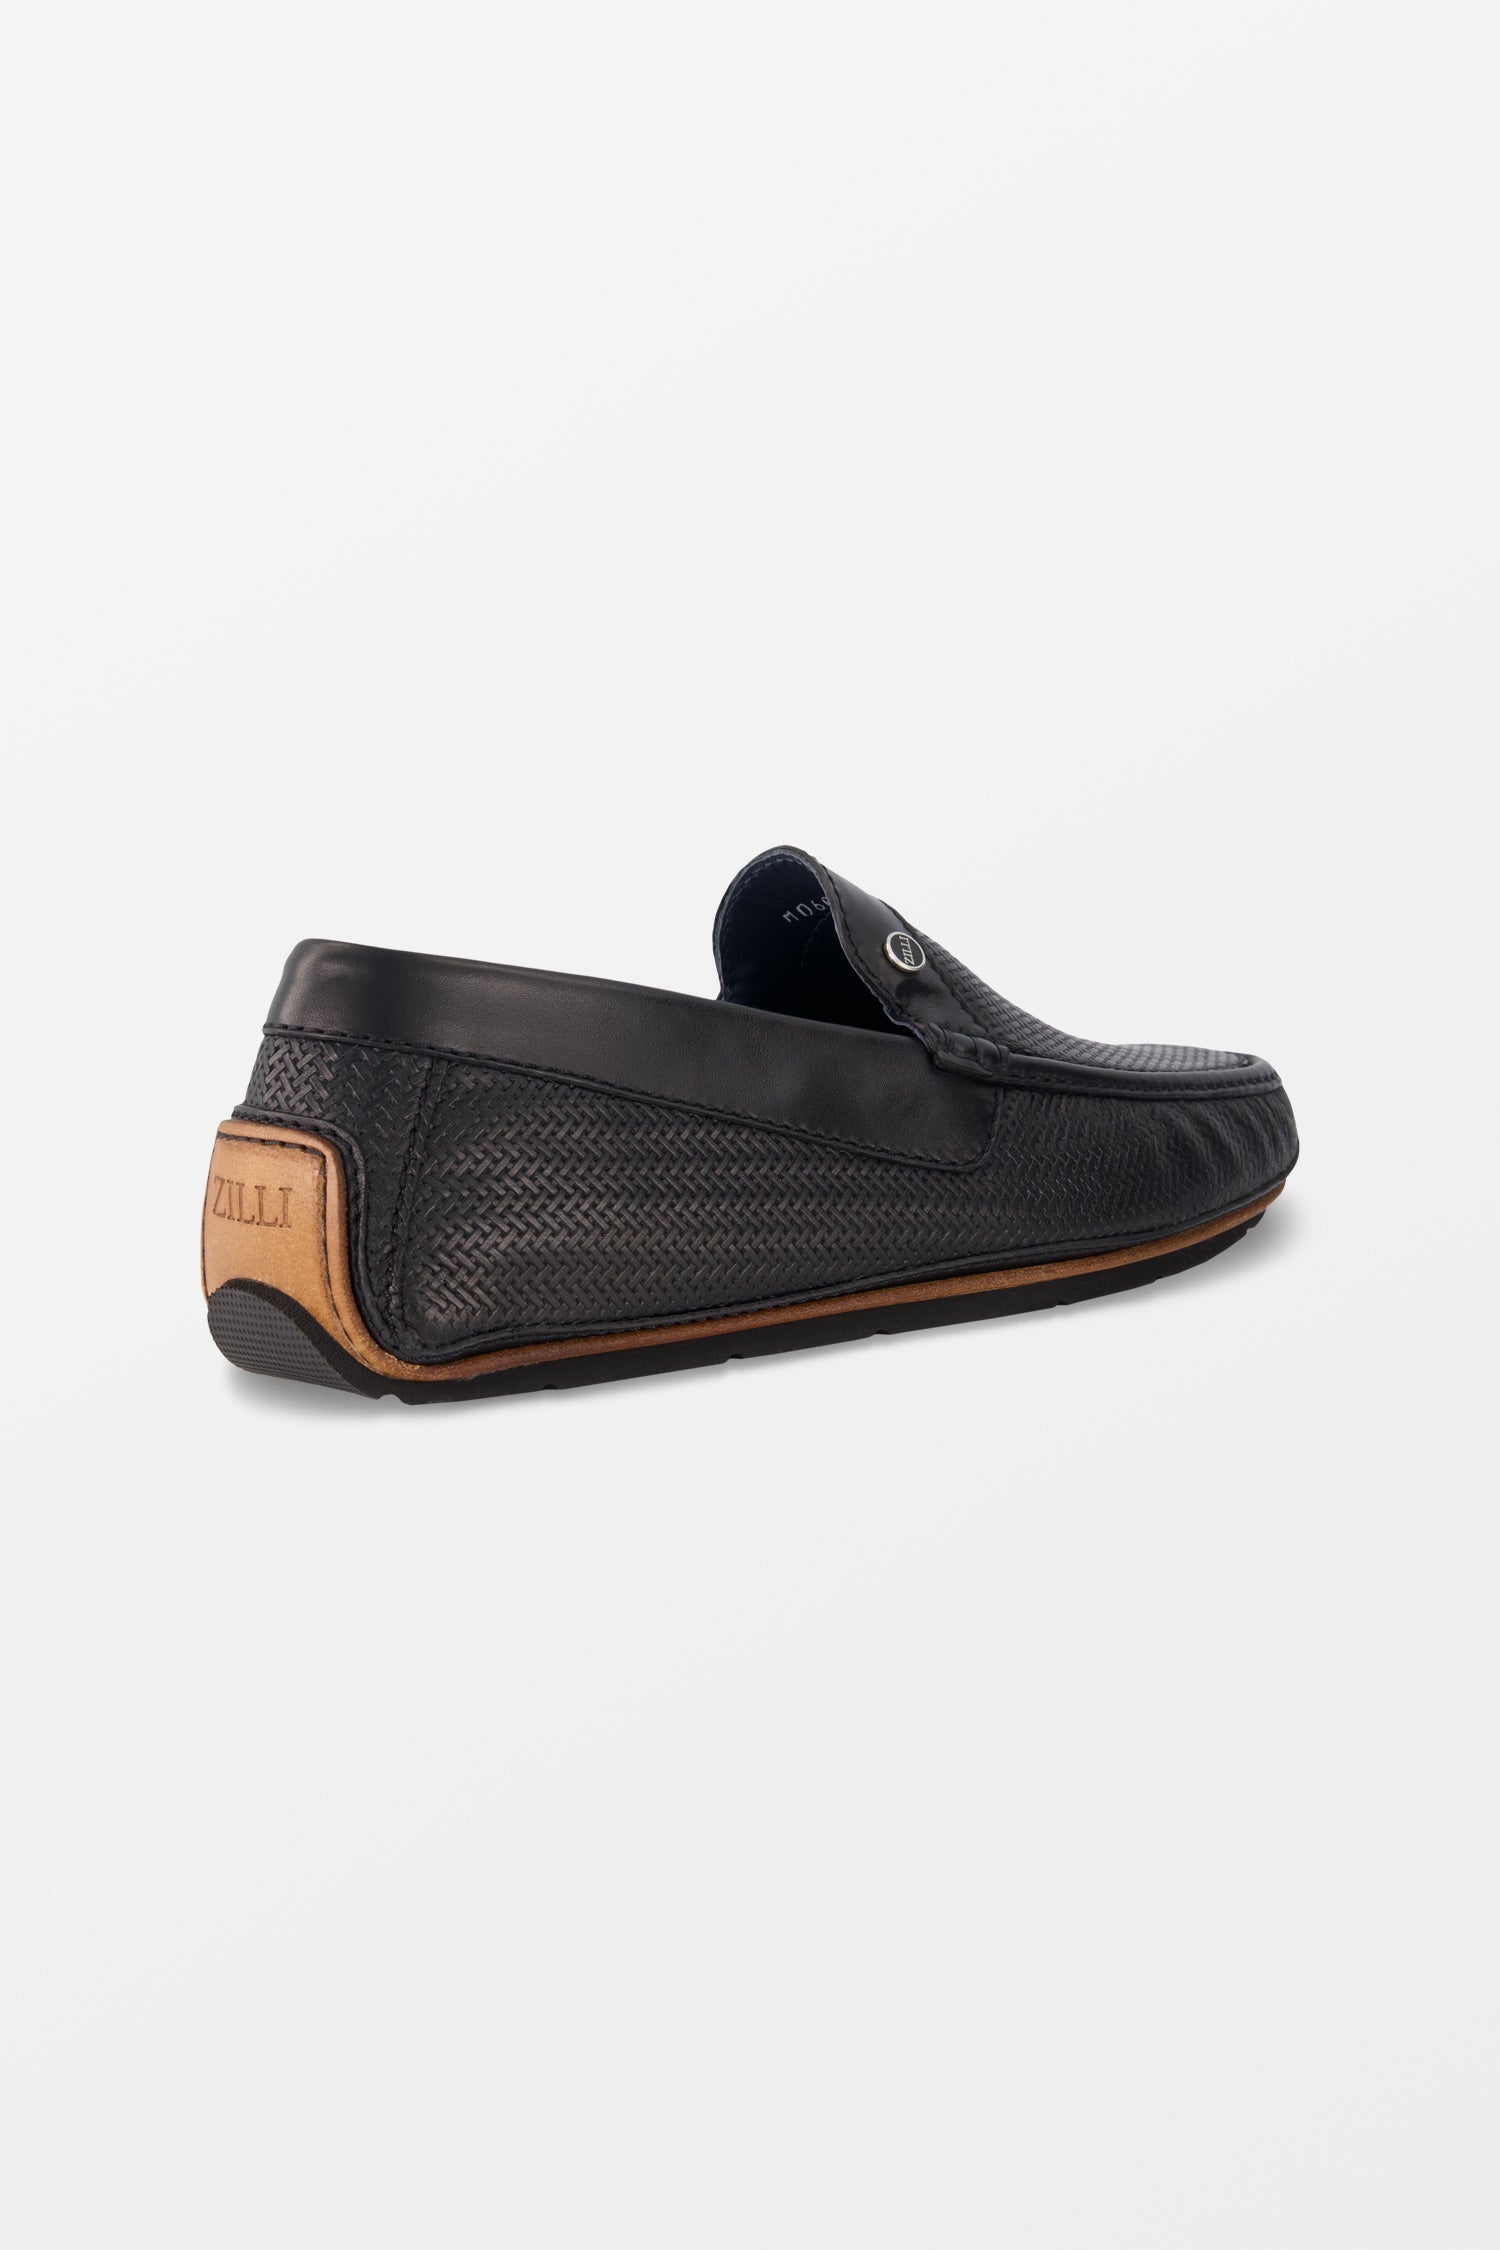 Zilli Casual Driving Moccasins